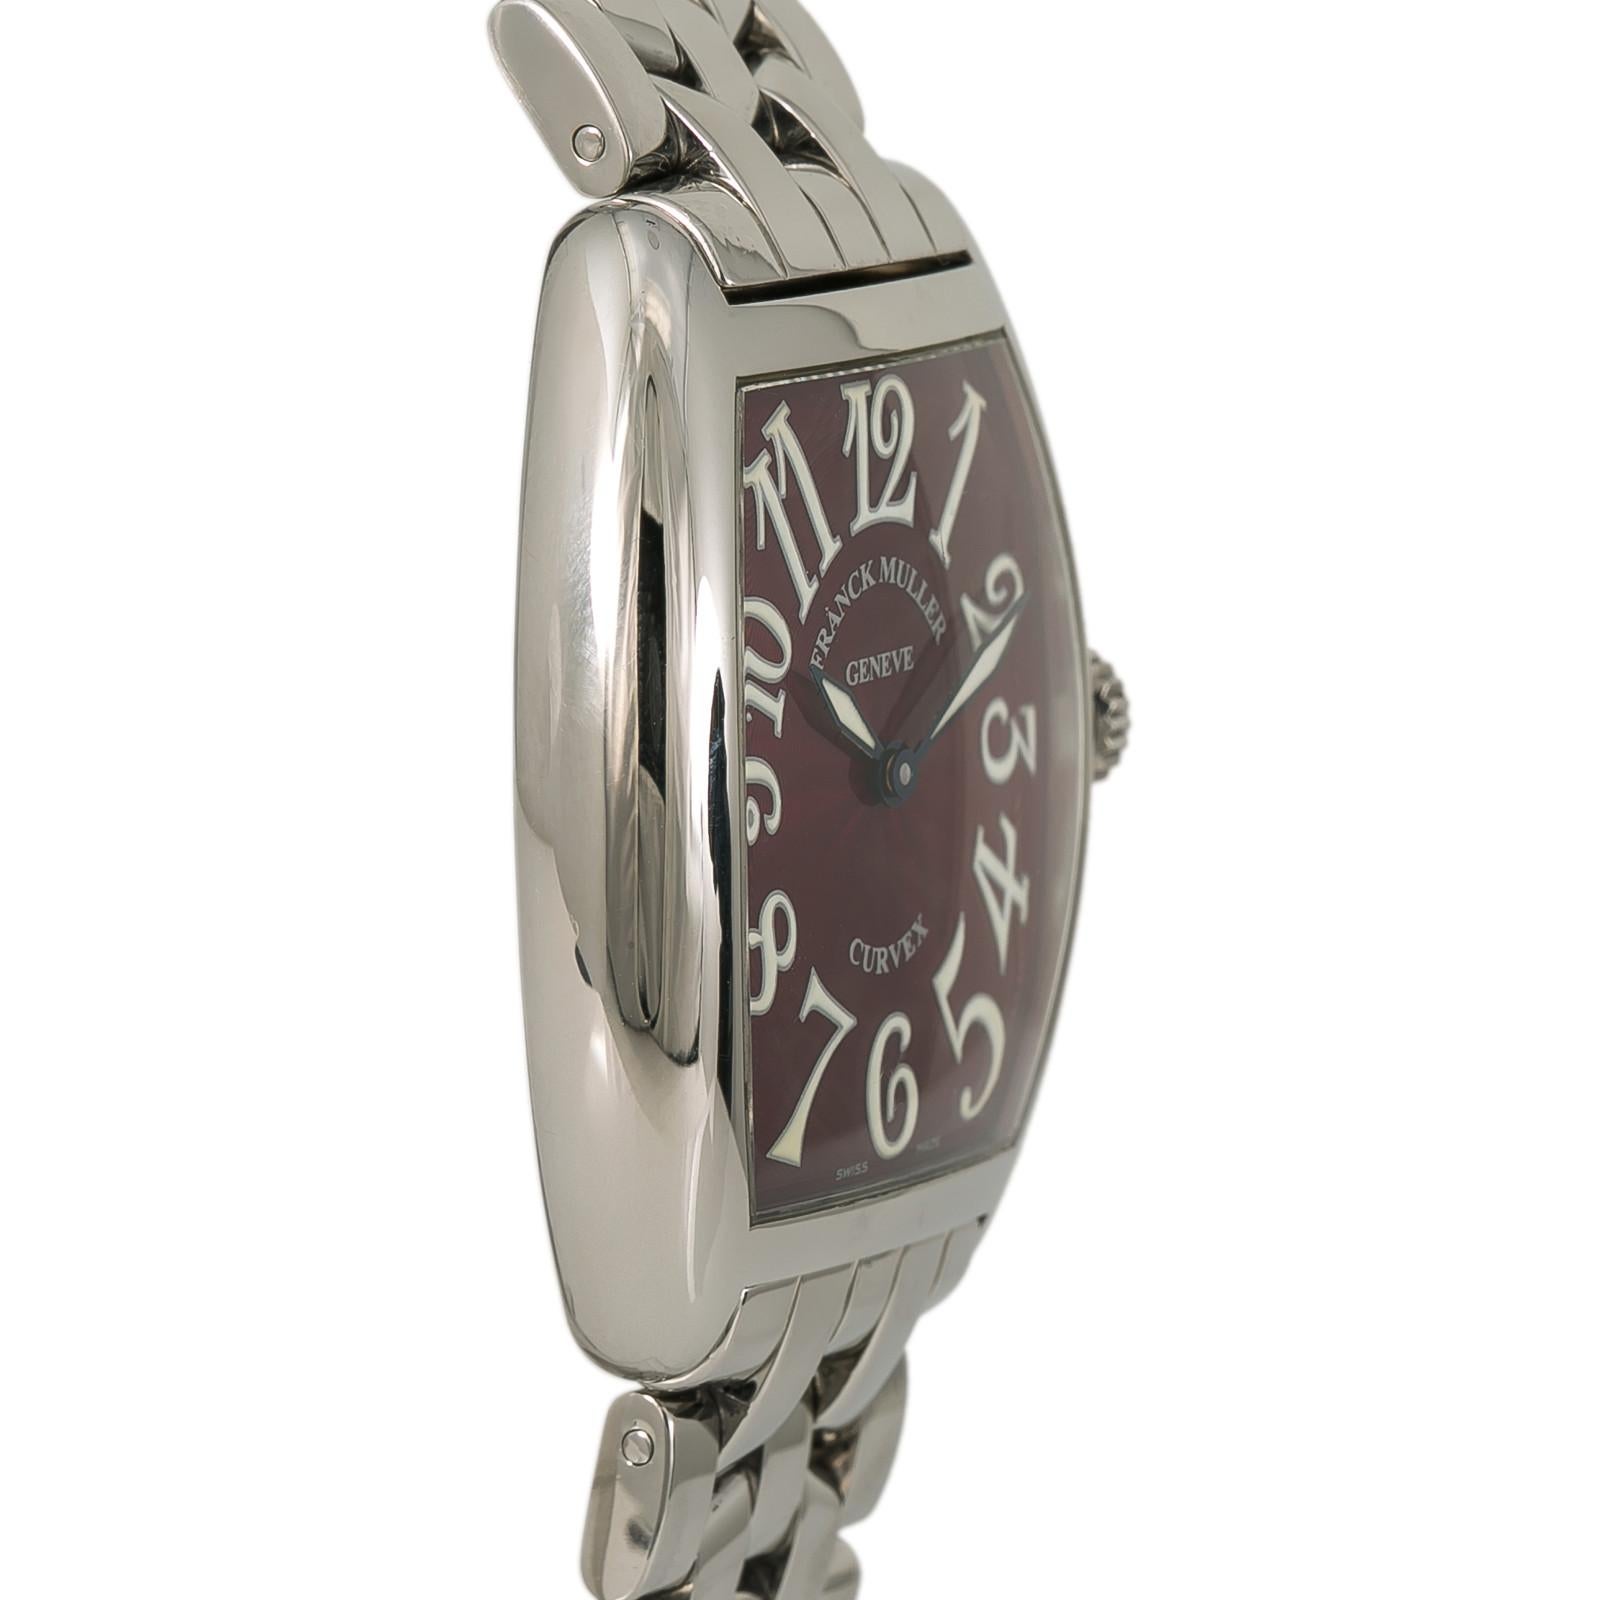 Franck Muller Cintree Curvex 7502 QZ, Black Dial, Certified and Warranty In Excellent Condition For Sale In Miami, FL